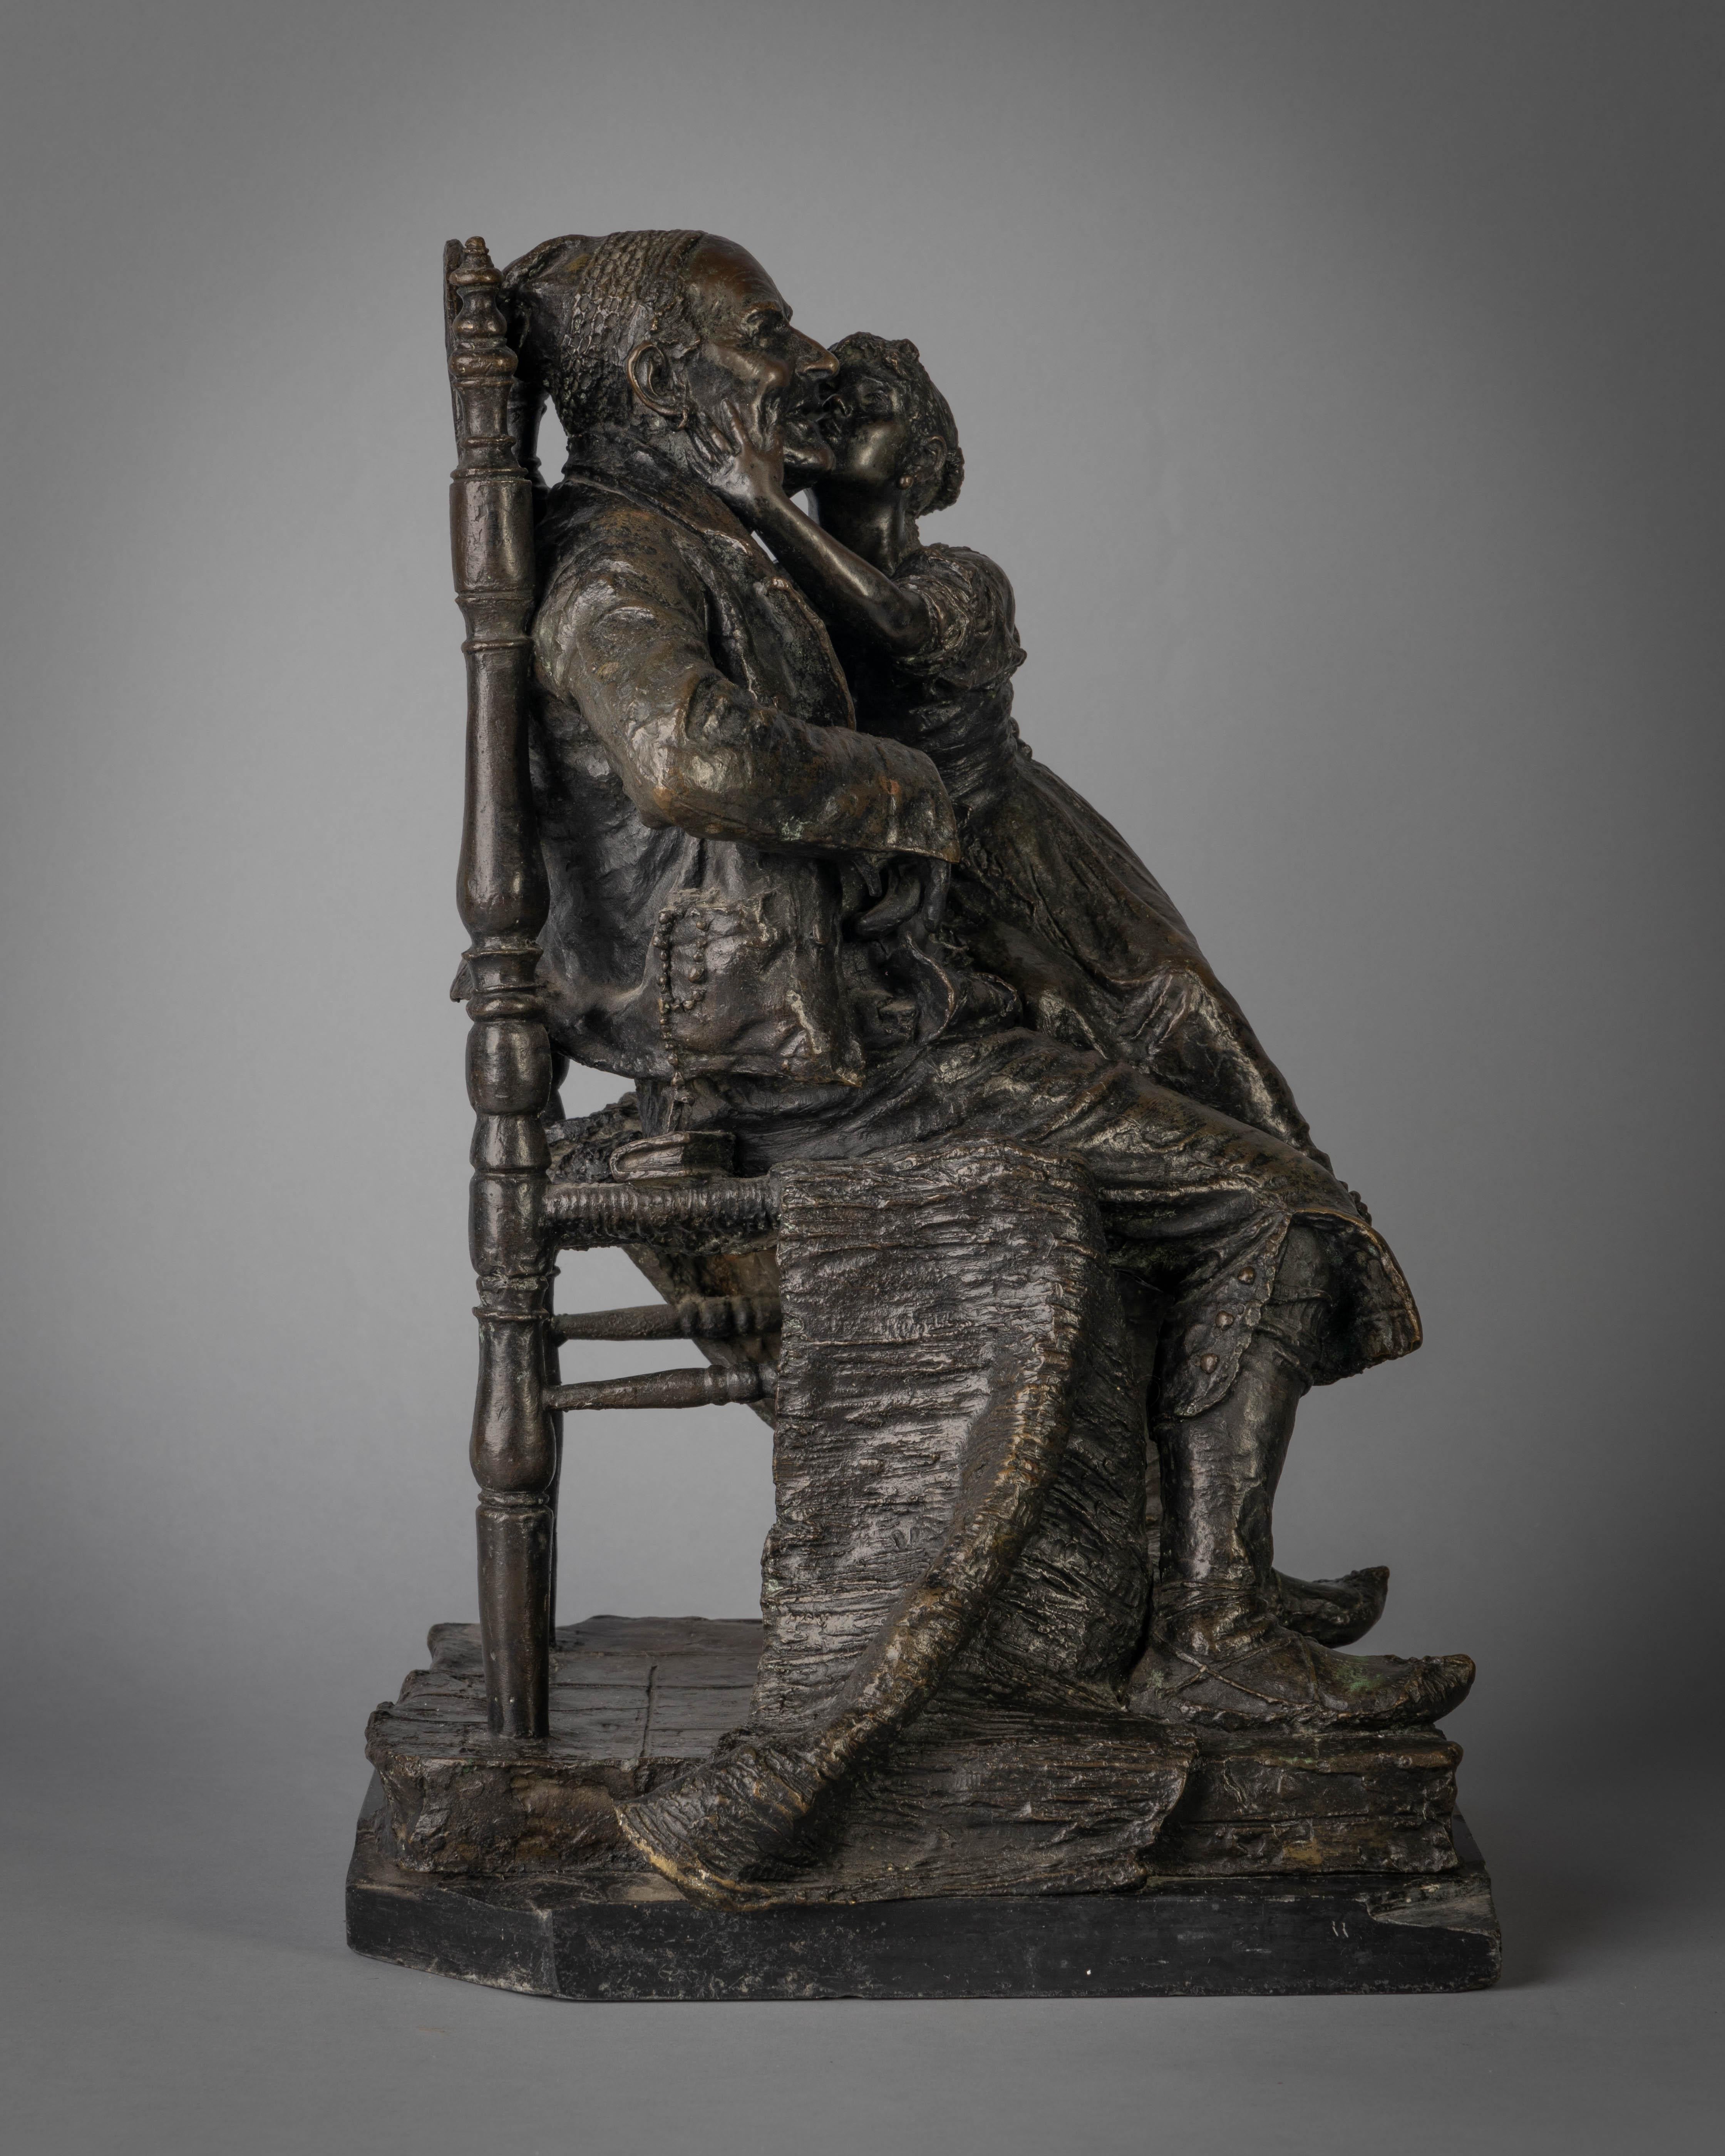 After a model by Constantino Barbella, late 19th century. The old man seated in a chair with the girl on his lap about to bestow him with a kiss, on a shaped square base. marked C. BARBELLA and it is signed in the mold C. Barbella Roma; the marble